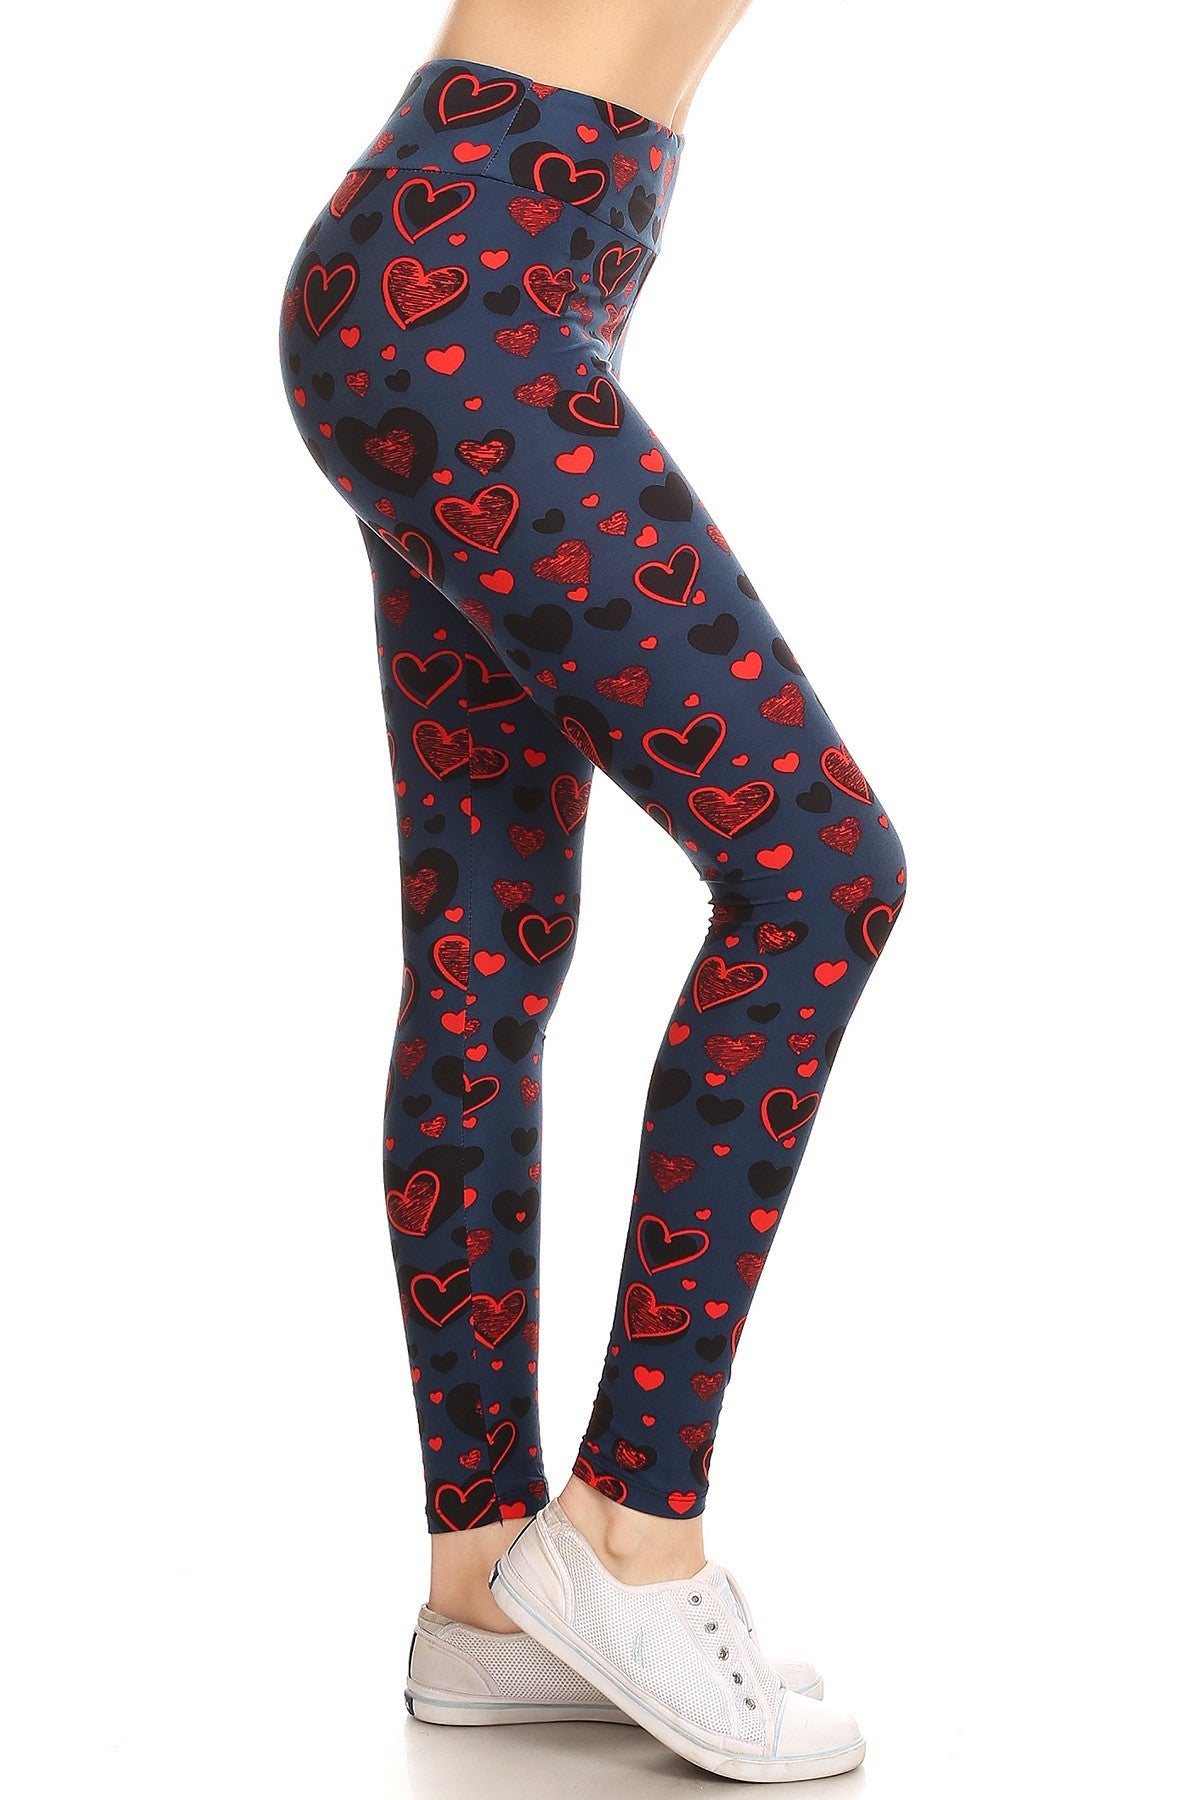 Yoga Style Banded Lined Heart Print, Full Length Leggings In A Slim Fitting Style With A Banded High Waist - Tigbul's Fashion